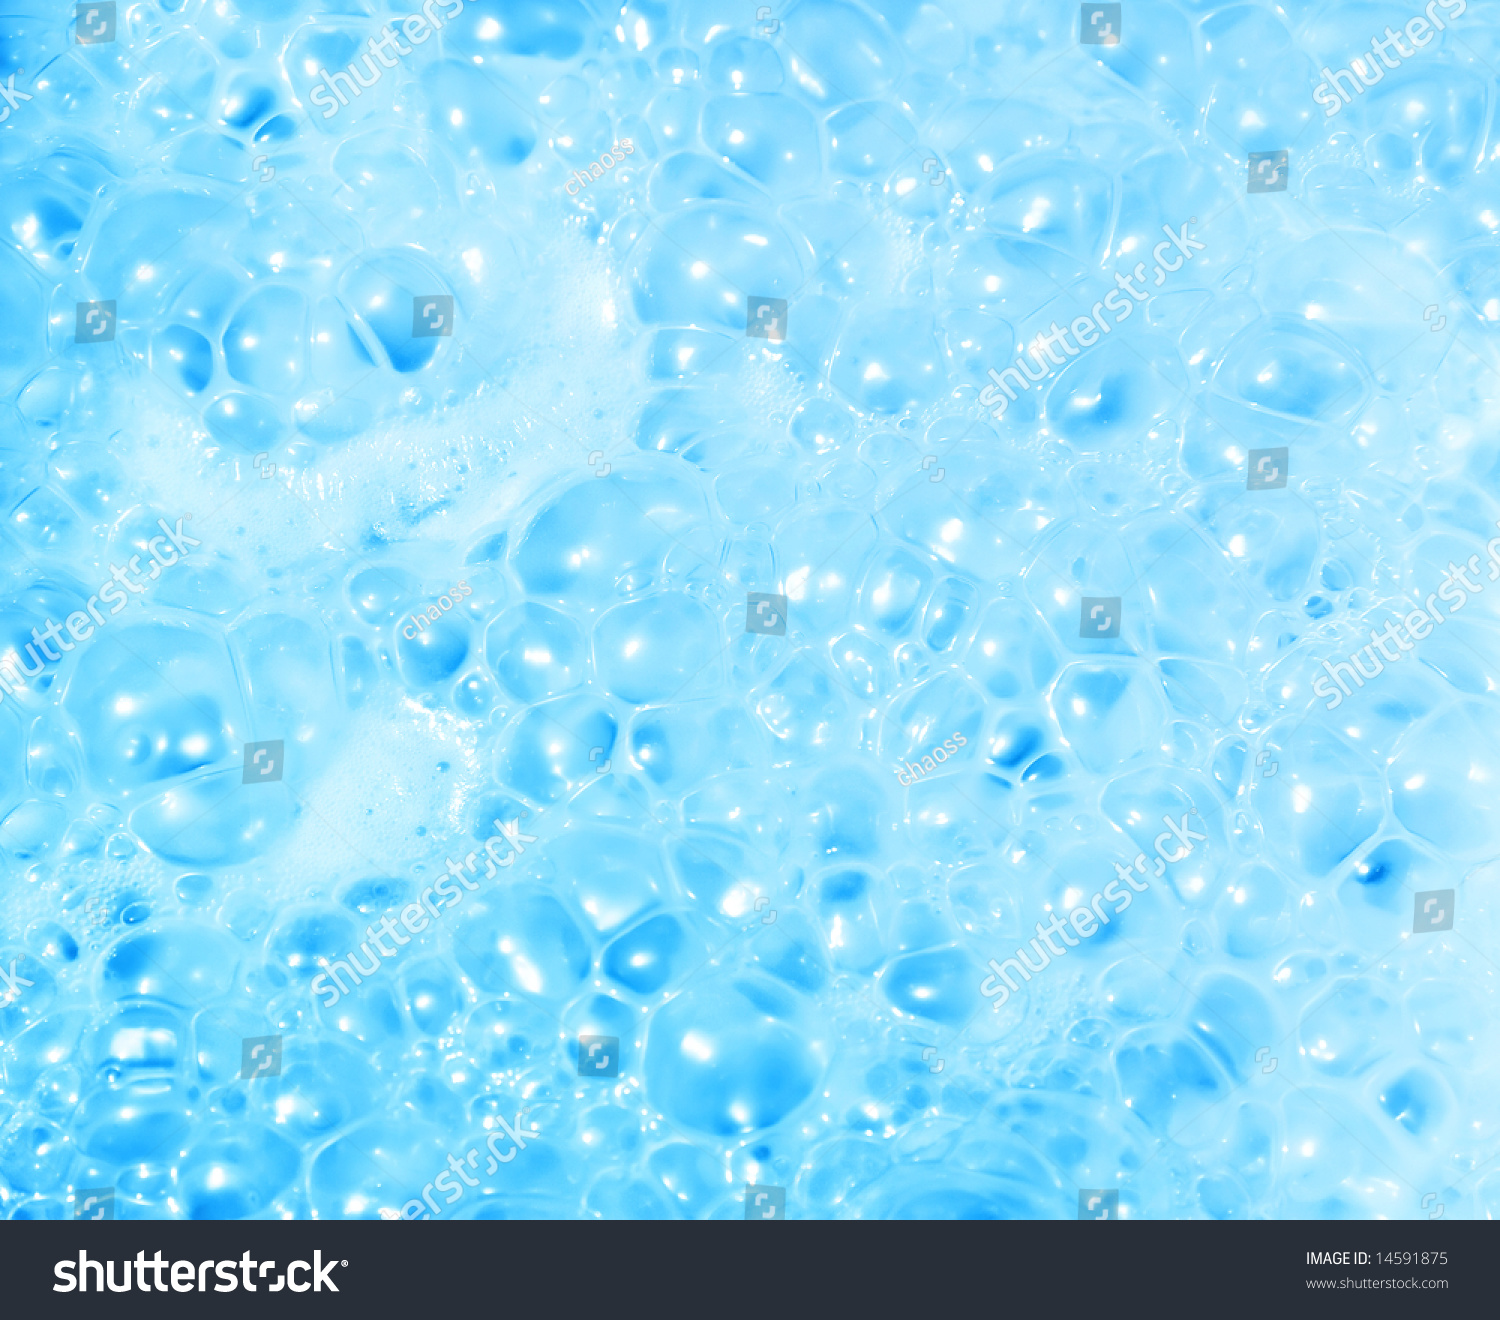 Abstract Blue Bubbles Texture Background Stock Photo 14591875 ...